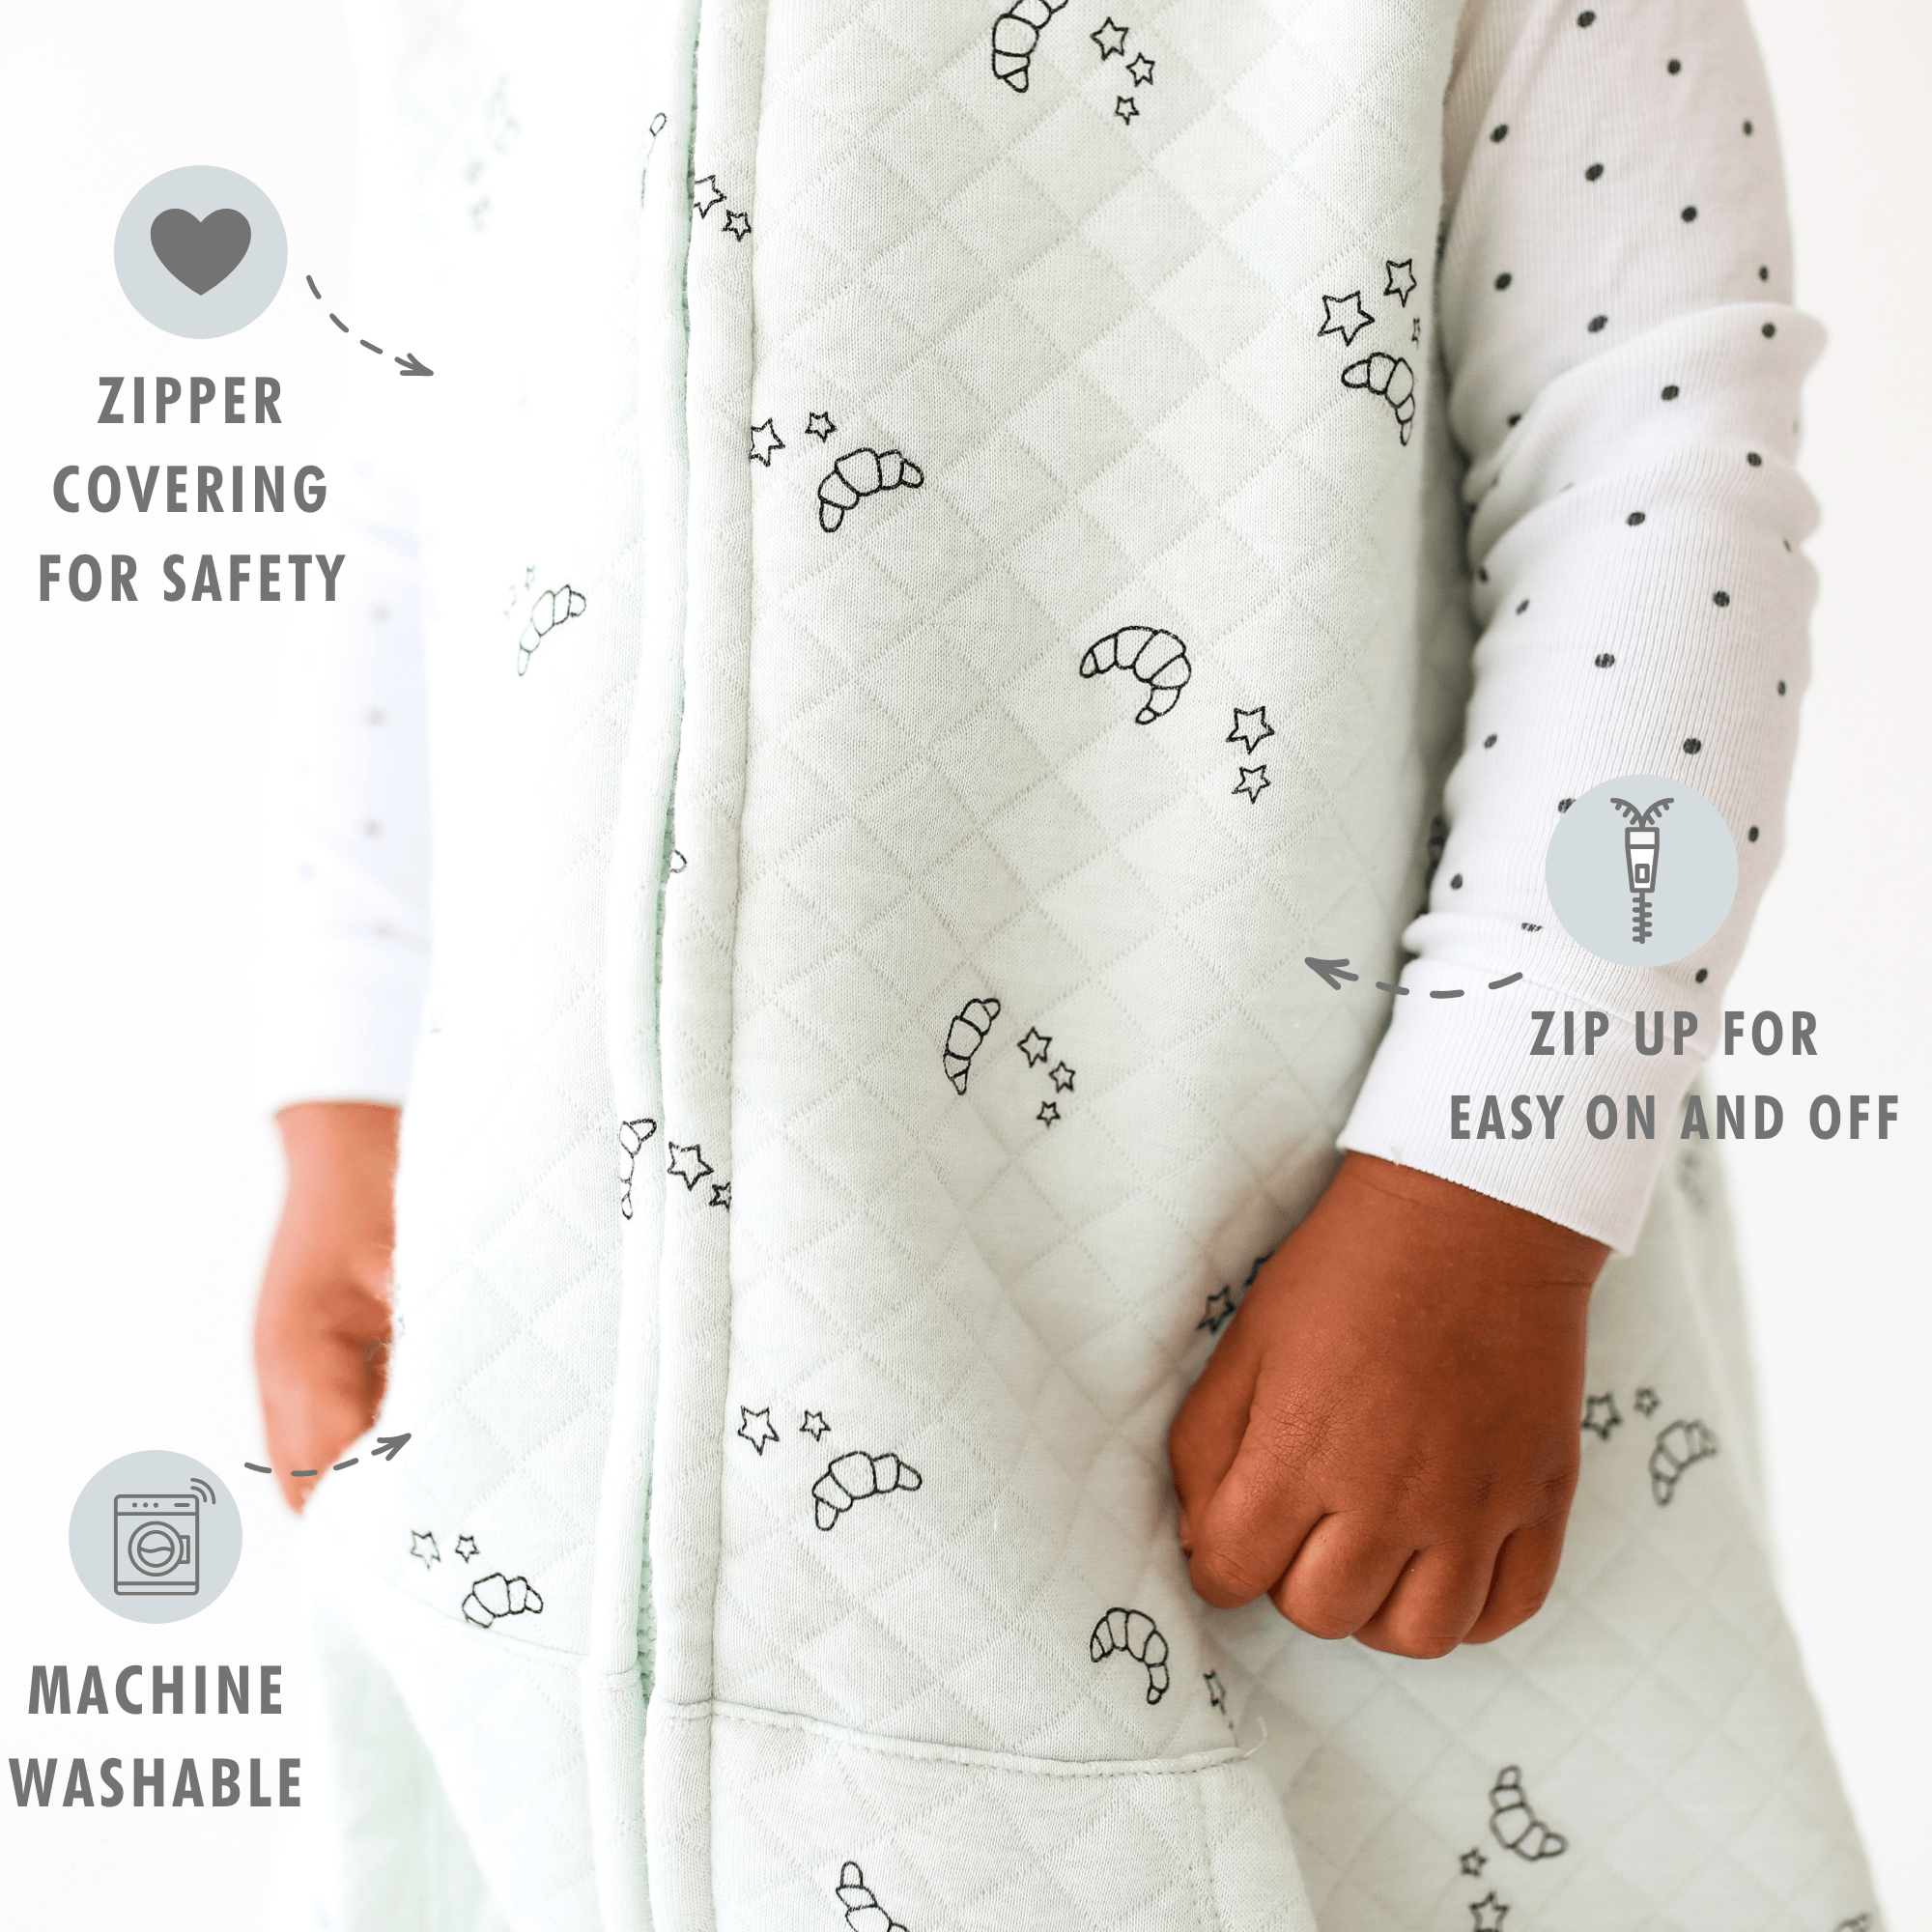 Tealbee Croissant Dreamsuit - zipper covering for safety, zip up for easy on and off, machine washable.